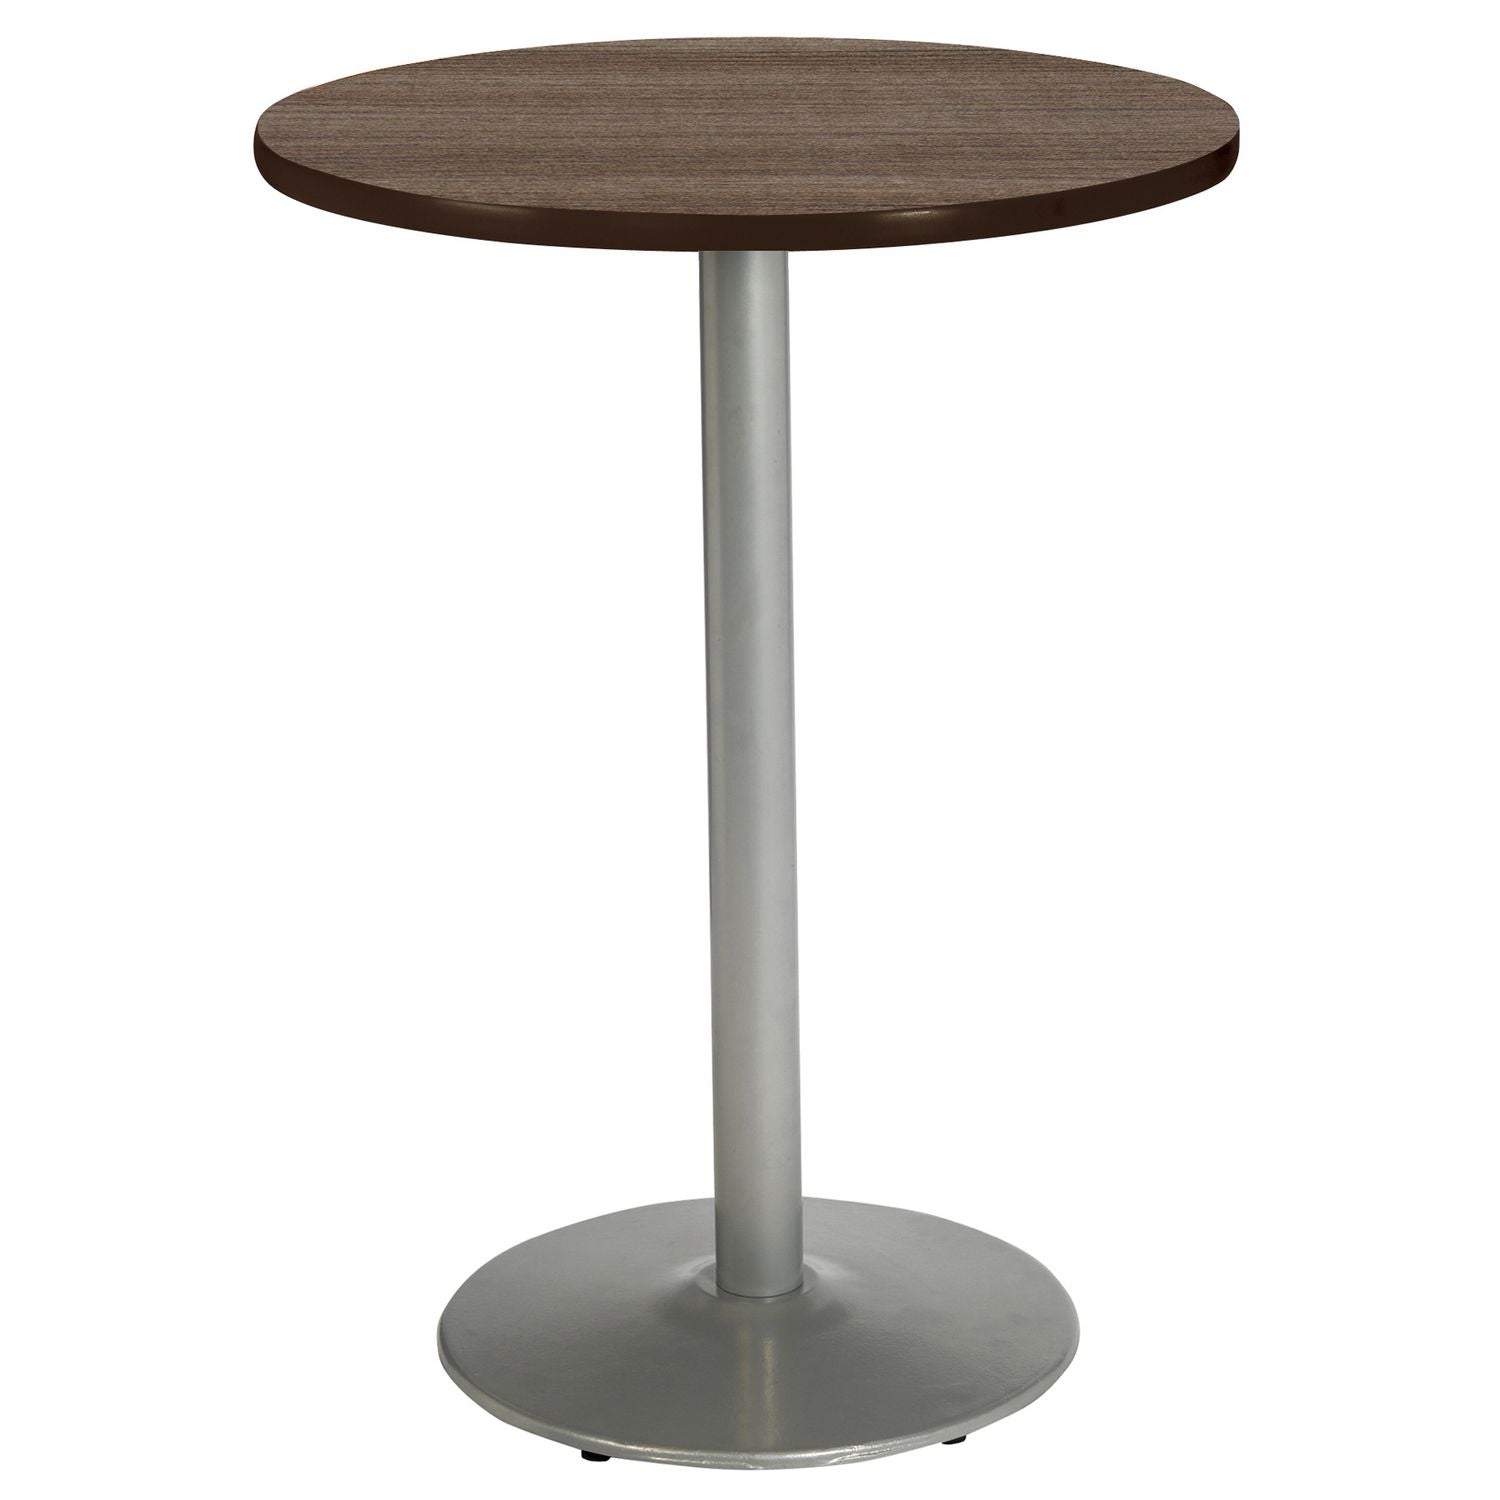 pedestal-bistro-table-with-four-coral-kool-series-barstools-round-36-dia-x-41h-studio-teak-ships-in-4-6-business-days_kfi811774037303 - 2